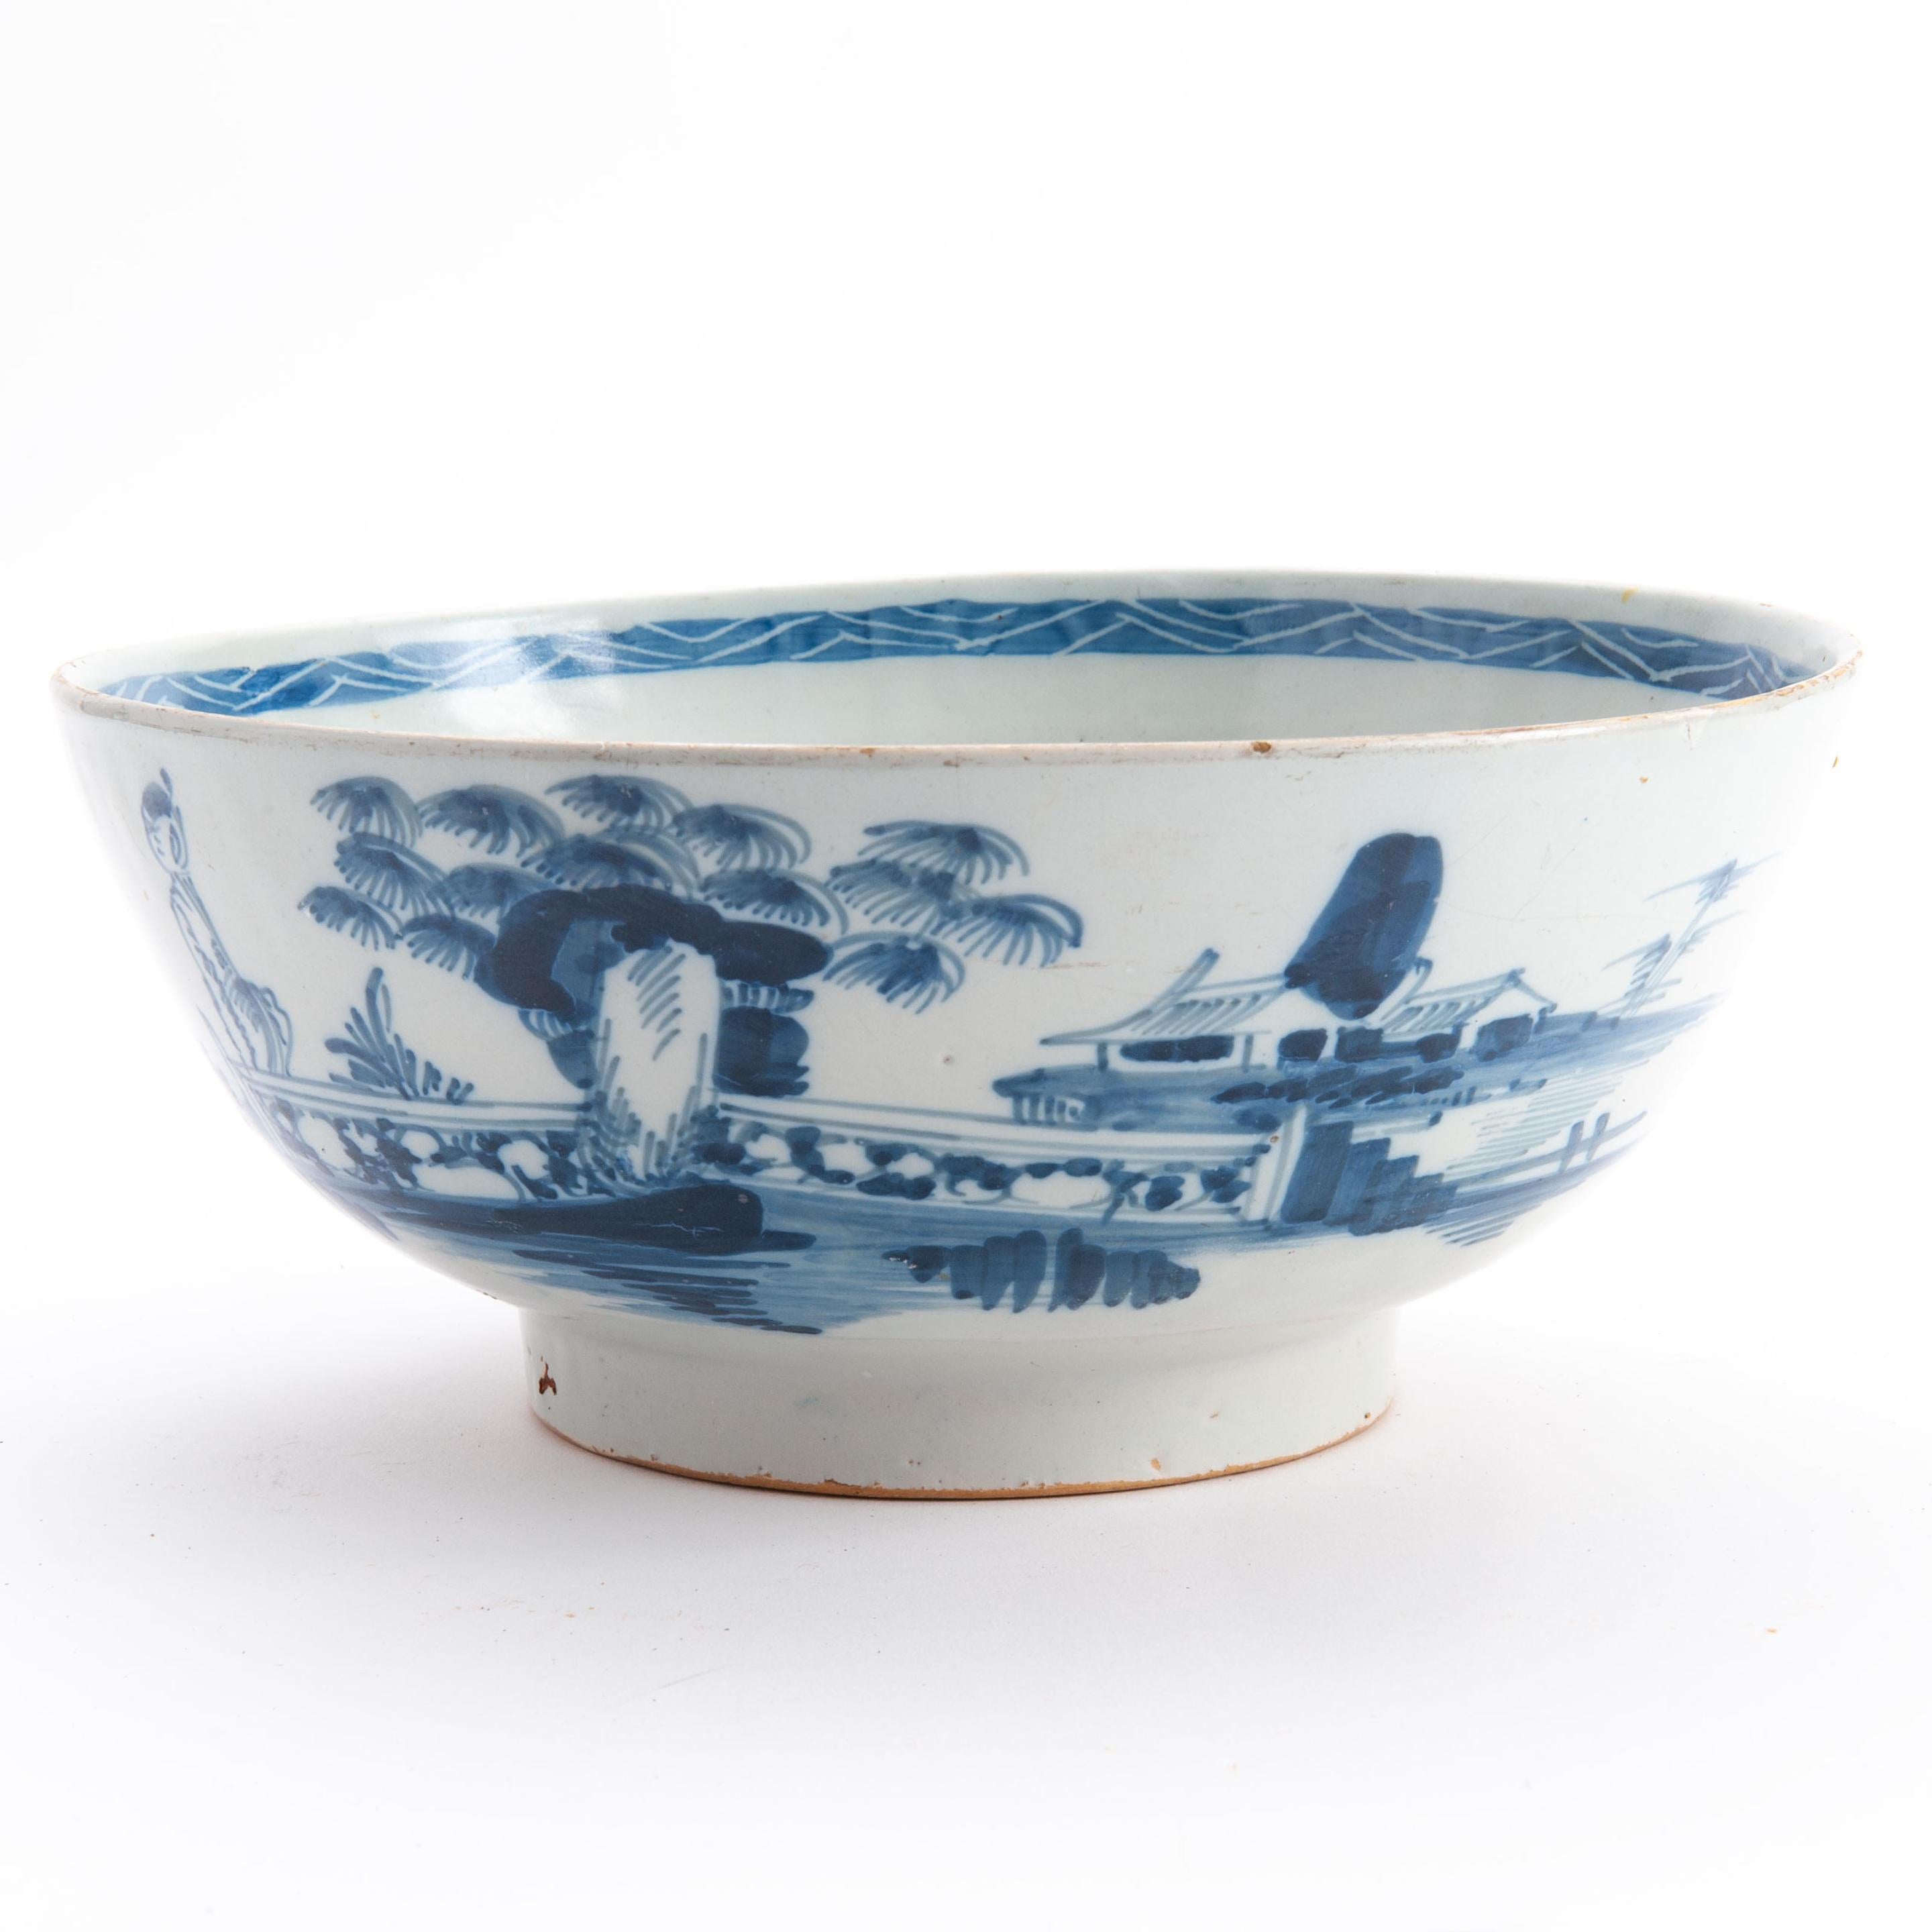 Ref: KA035

18th century English Liverpool Delft blue and white bowl. 
Hand-painted.
Circa 1760.

Measurements: H: 11cm (4.3